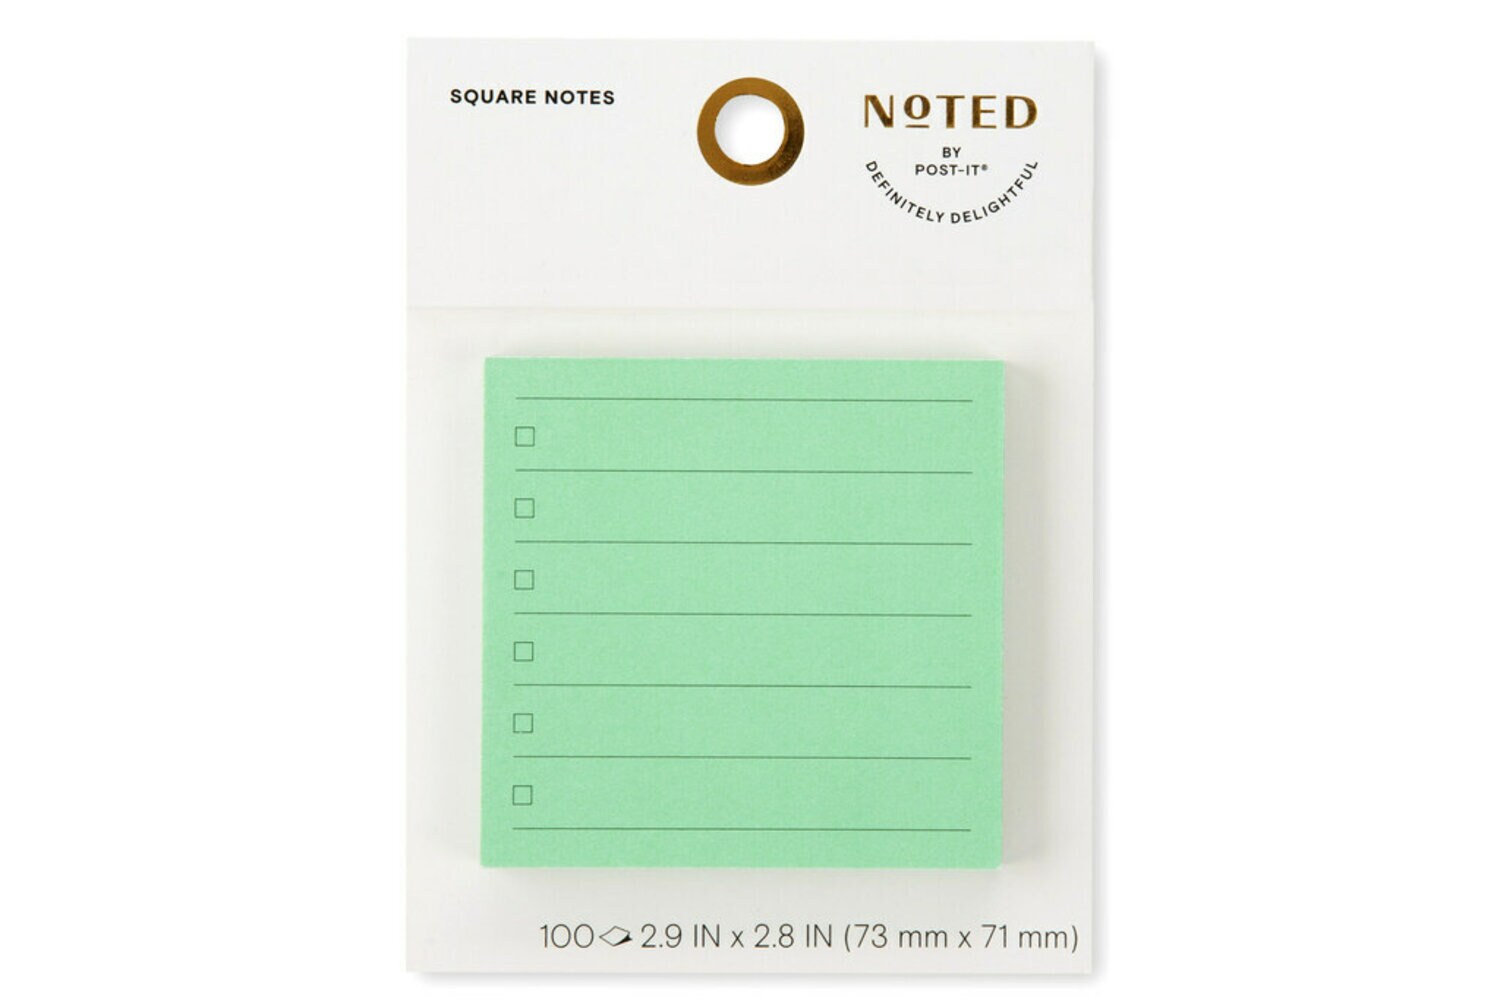 7100256643 - Post-it Printed Notes NTD-33-LST, 2.9 in x 2.8 in (73 mm x 71 mm)